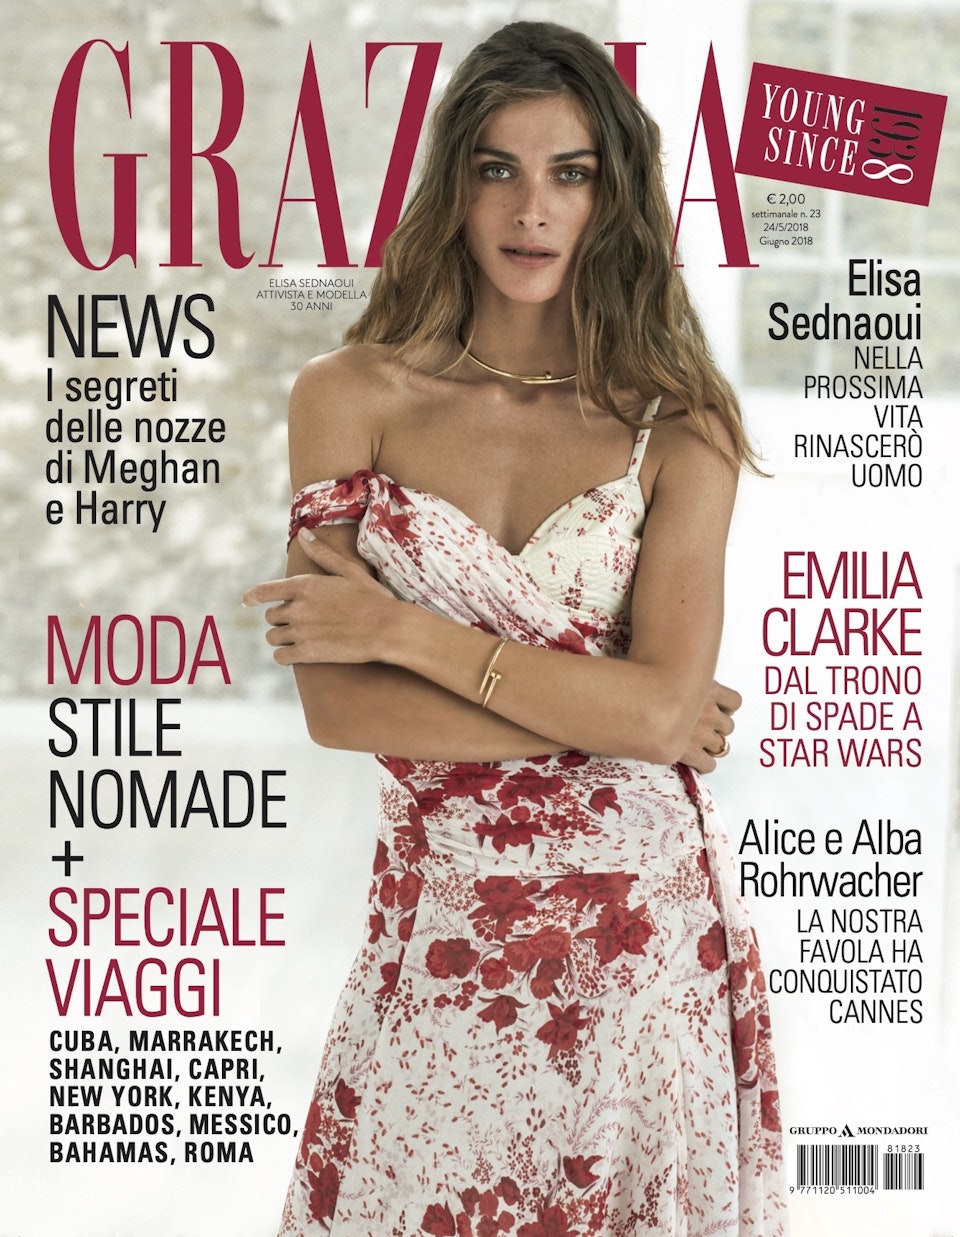 GRAZIA Italy by David Oldham feat. Elisa Sednaui - GRAZIA Italy by David Oldham